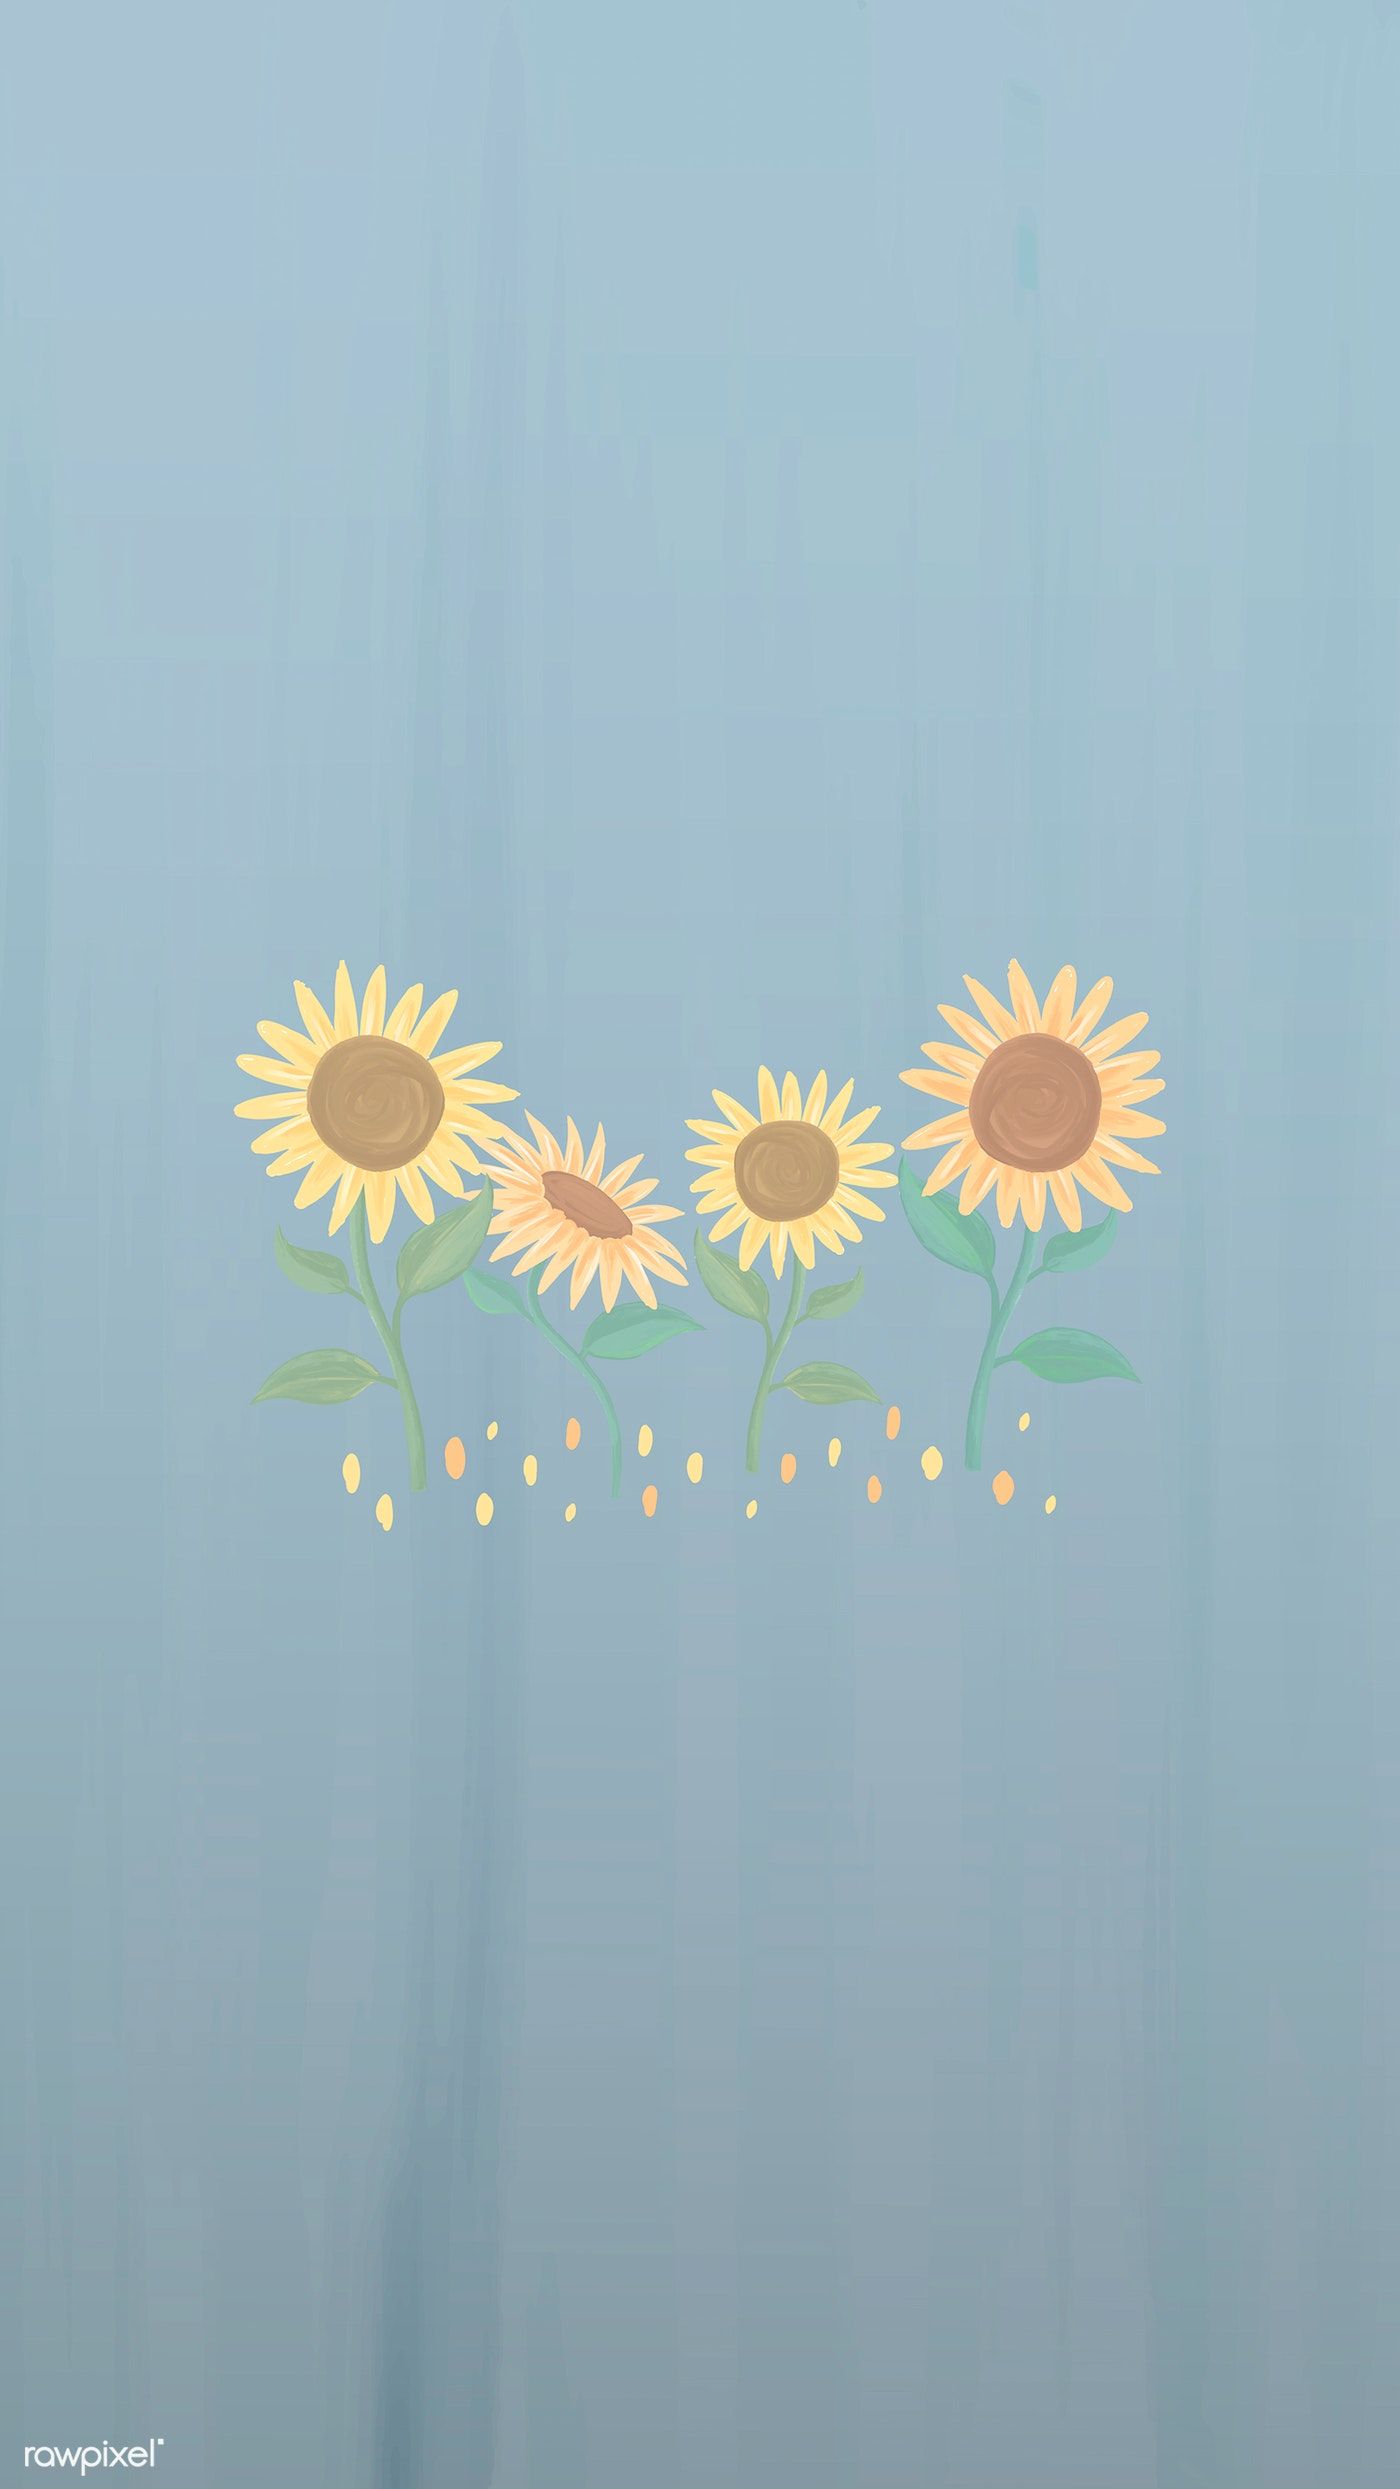 Download premium vector of Hand drawn sunflower mobile phone wallpaper vector by Tang about wallpaper, sunflower, sunflower vector print, floral patterns phone wallpaper pastel, and aesthetic sunflower 1229950